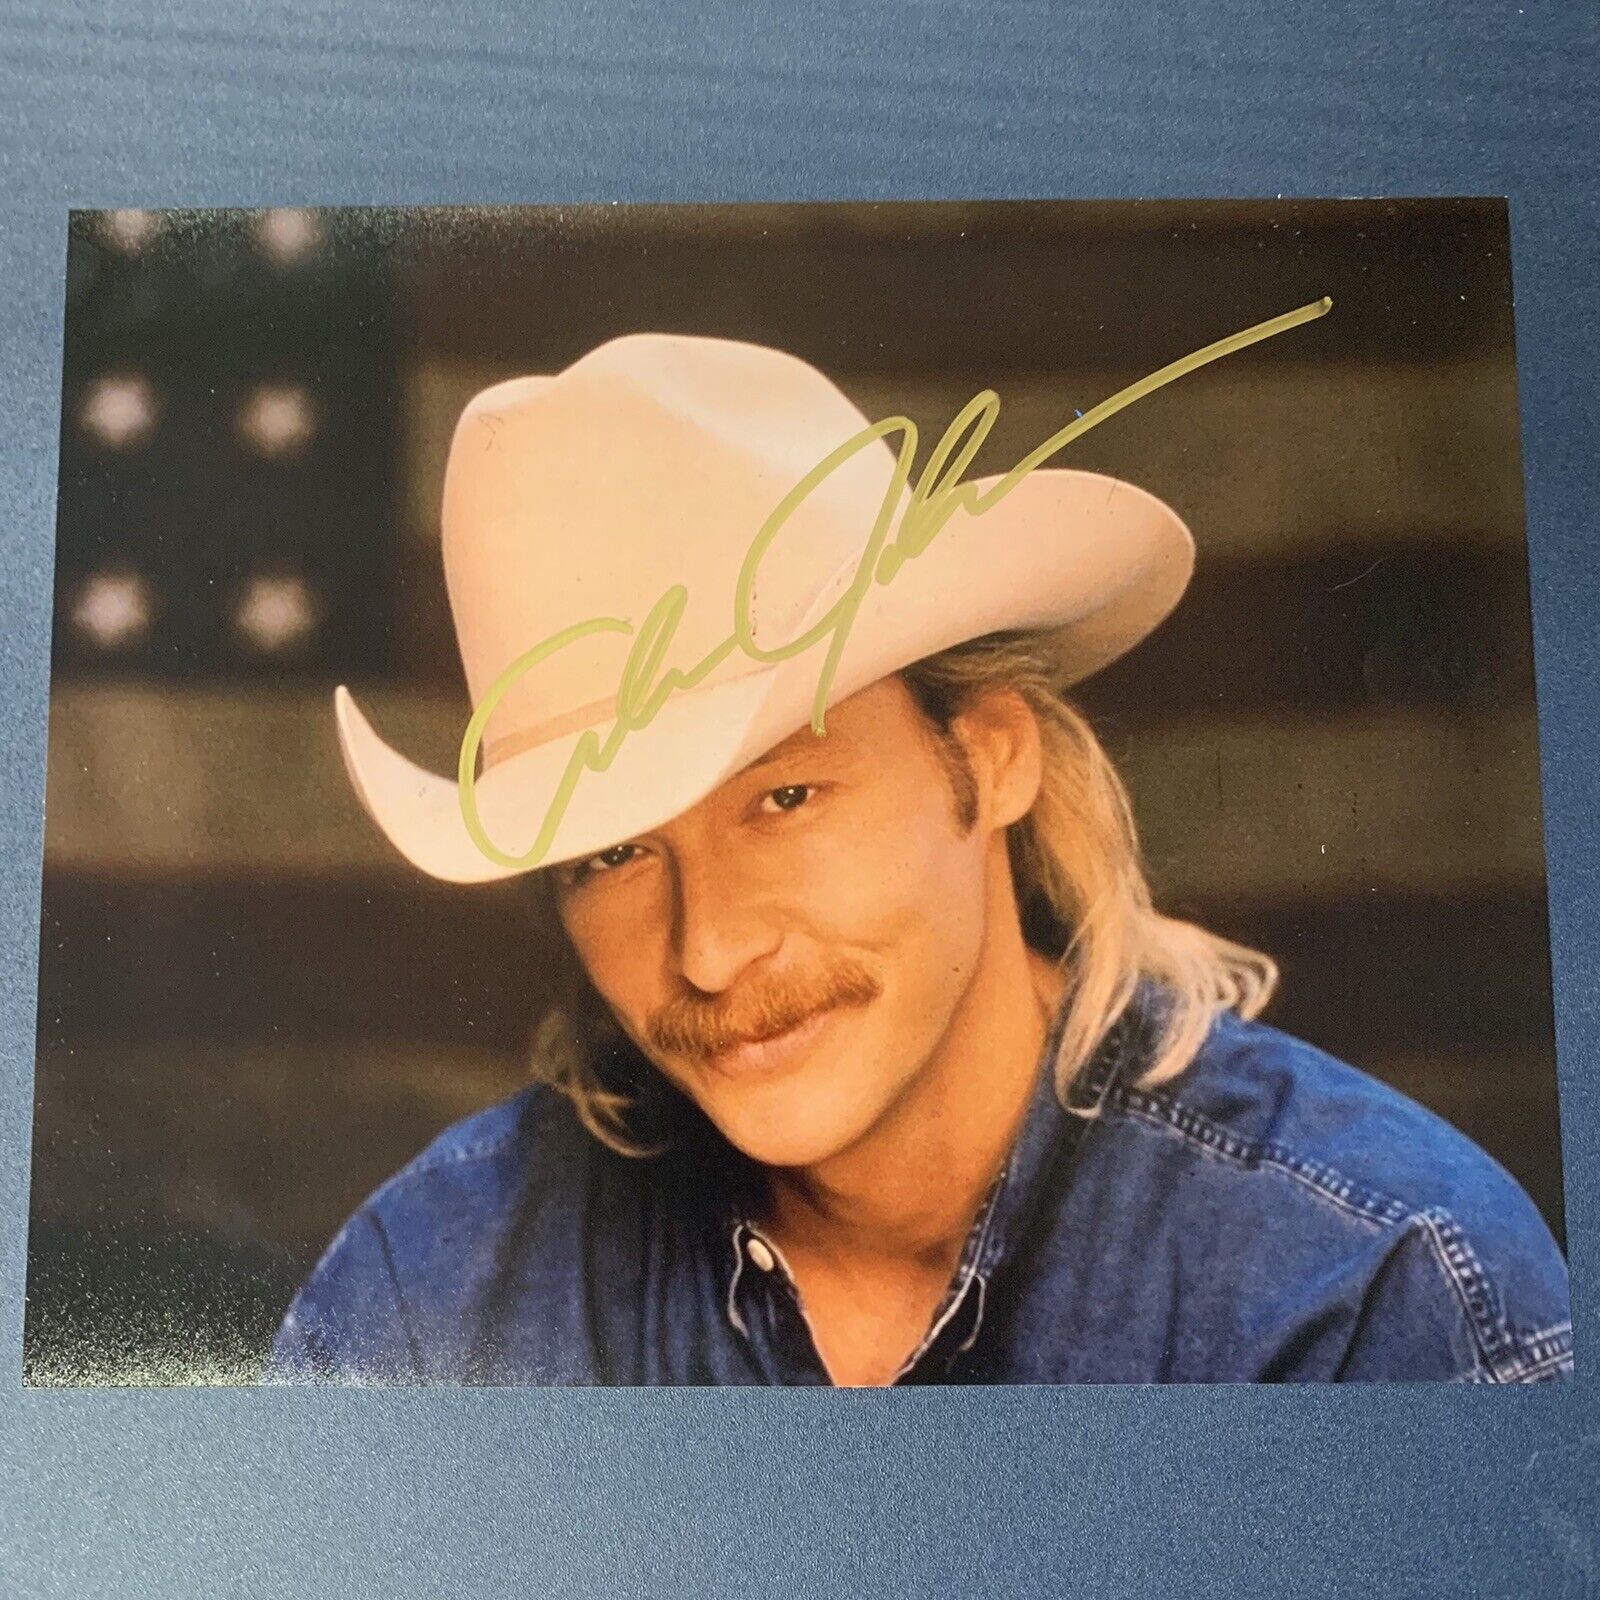 ALAN JACKSON HAND SIGNED 8x10 Photo Poster painting COUNTRY MUSIC SUPER STAR LEGEND RARE COA